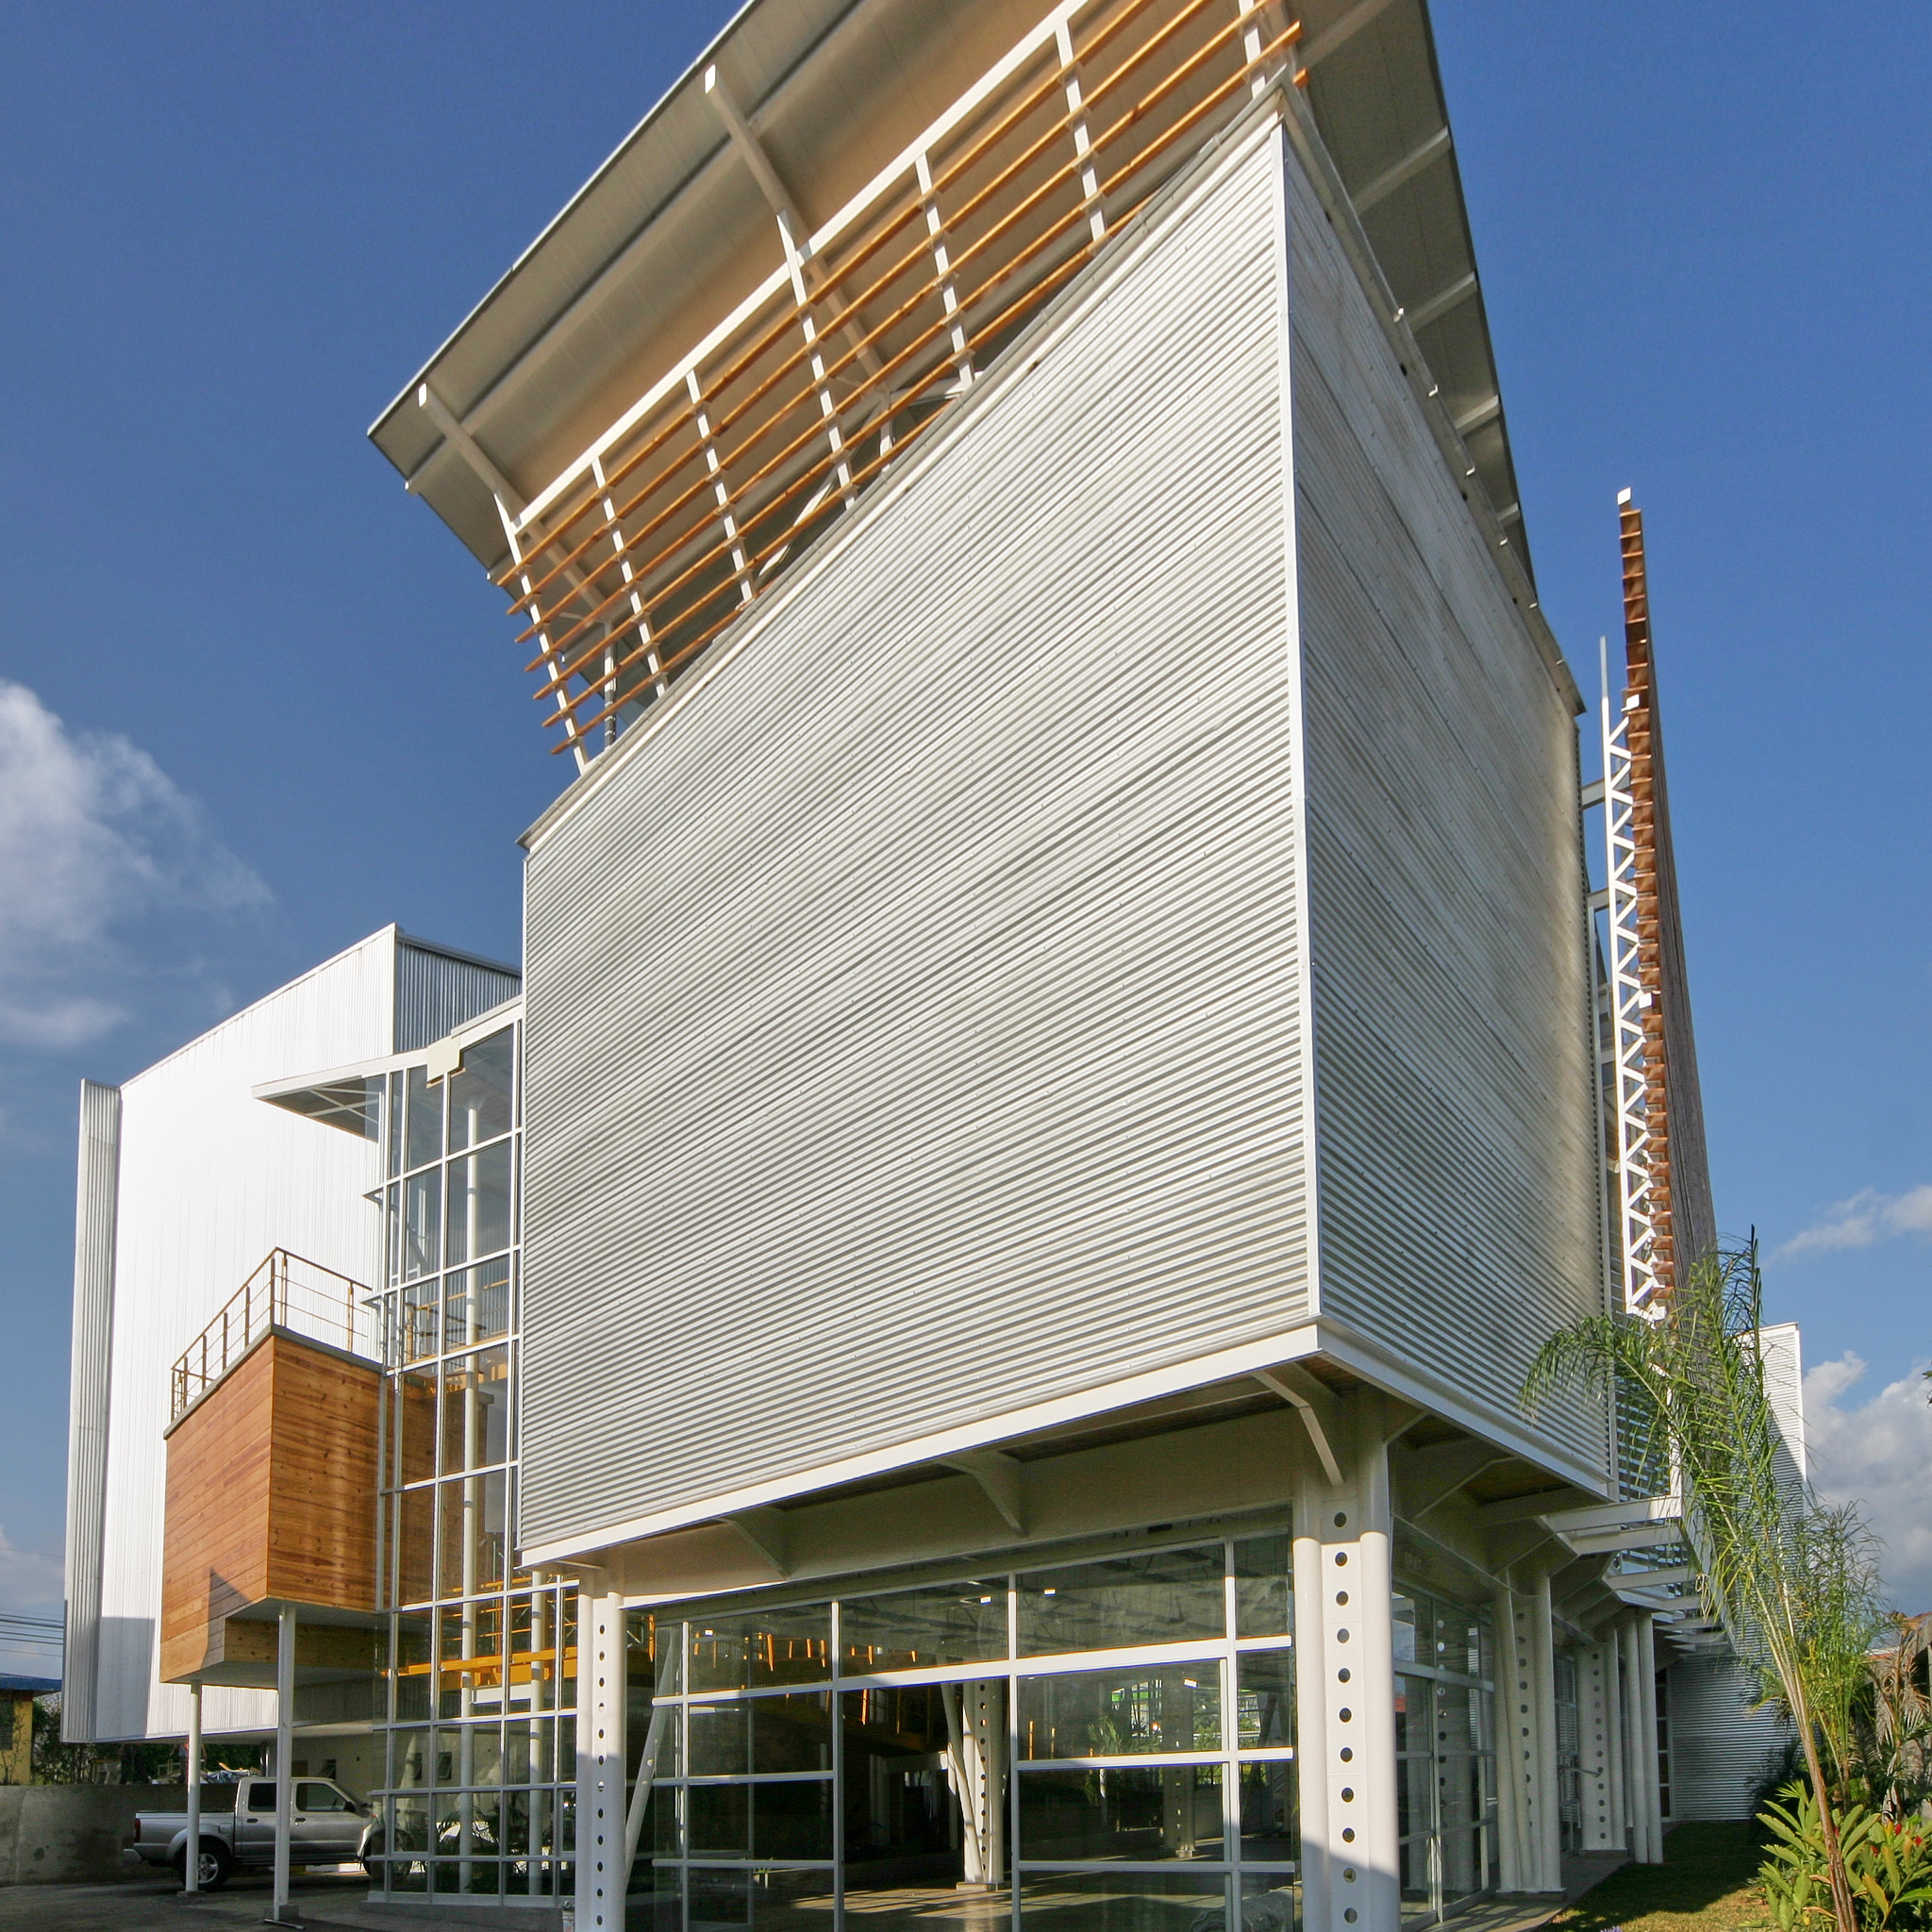 West view of Veritas University Auditorium and Workshop, depicting the separated volumes by the glass atrium